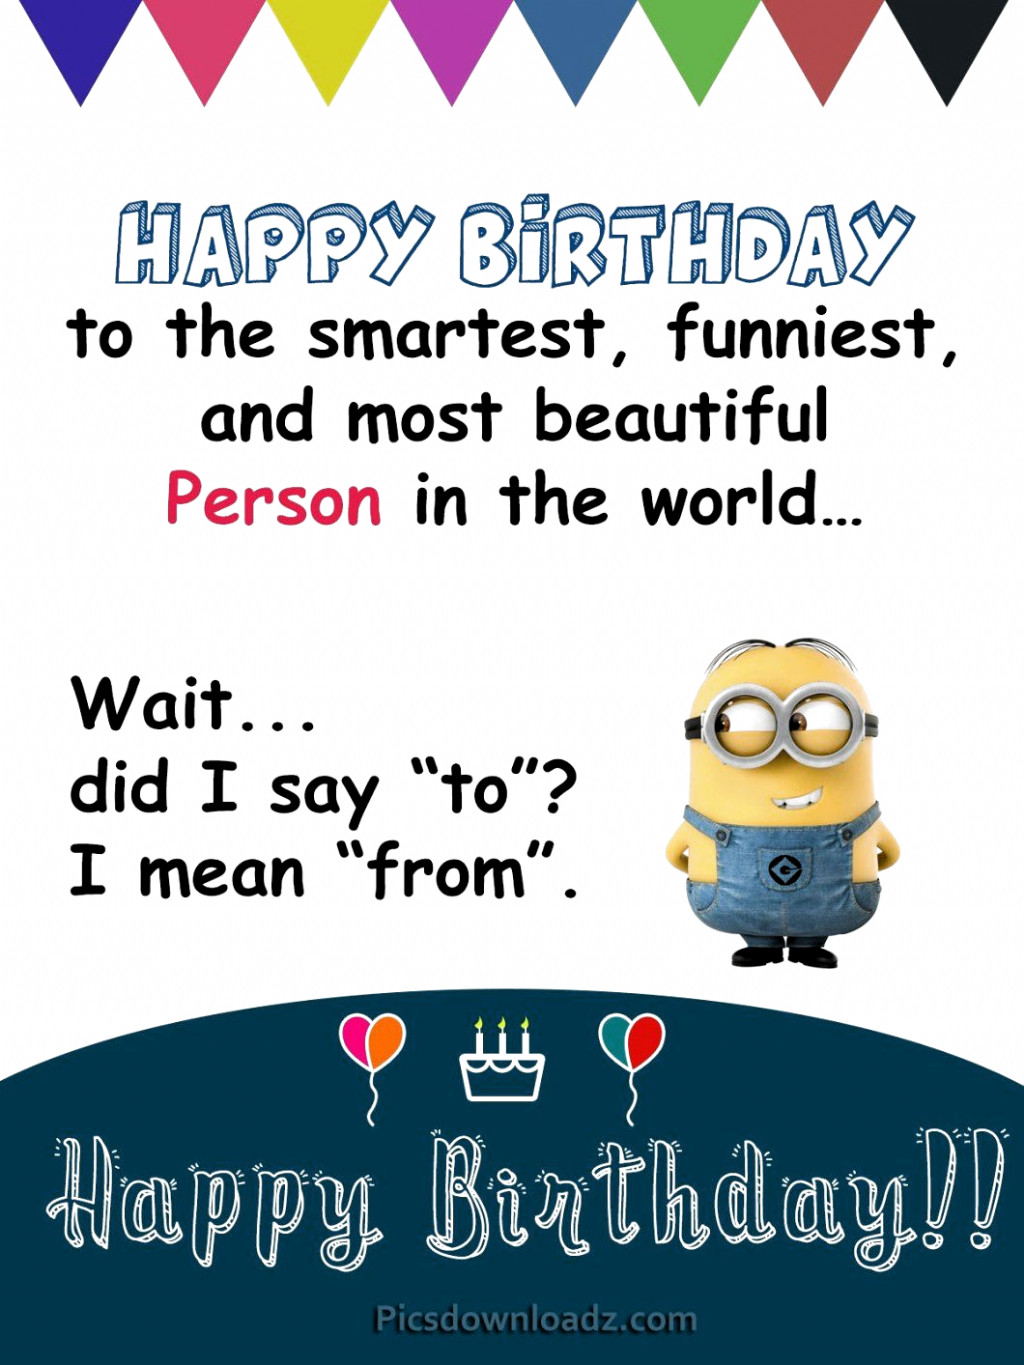 Happy Birthday Wishes To A Friend Funny
 Happy Birthday to the smartest funniest and most